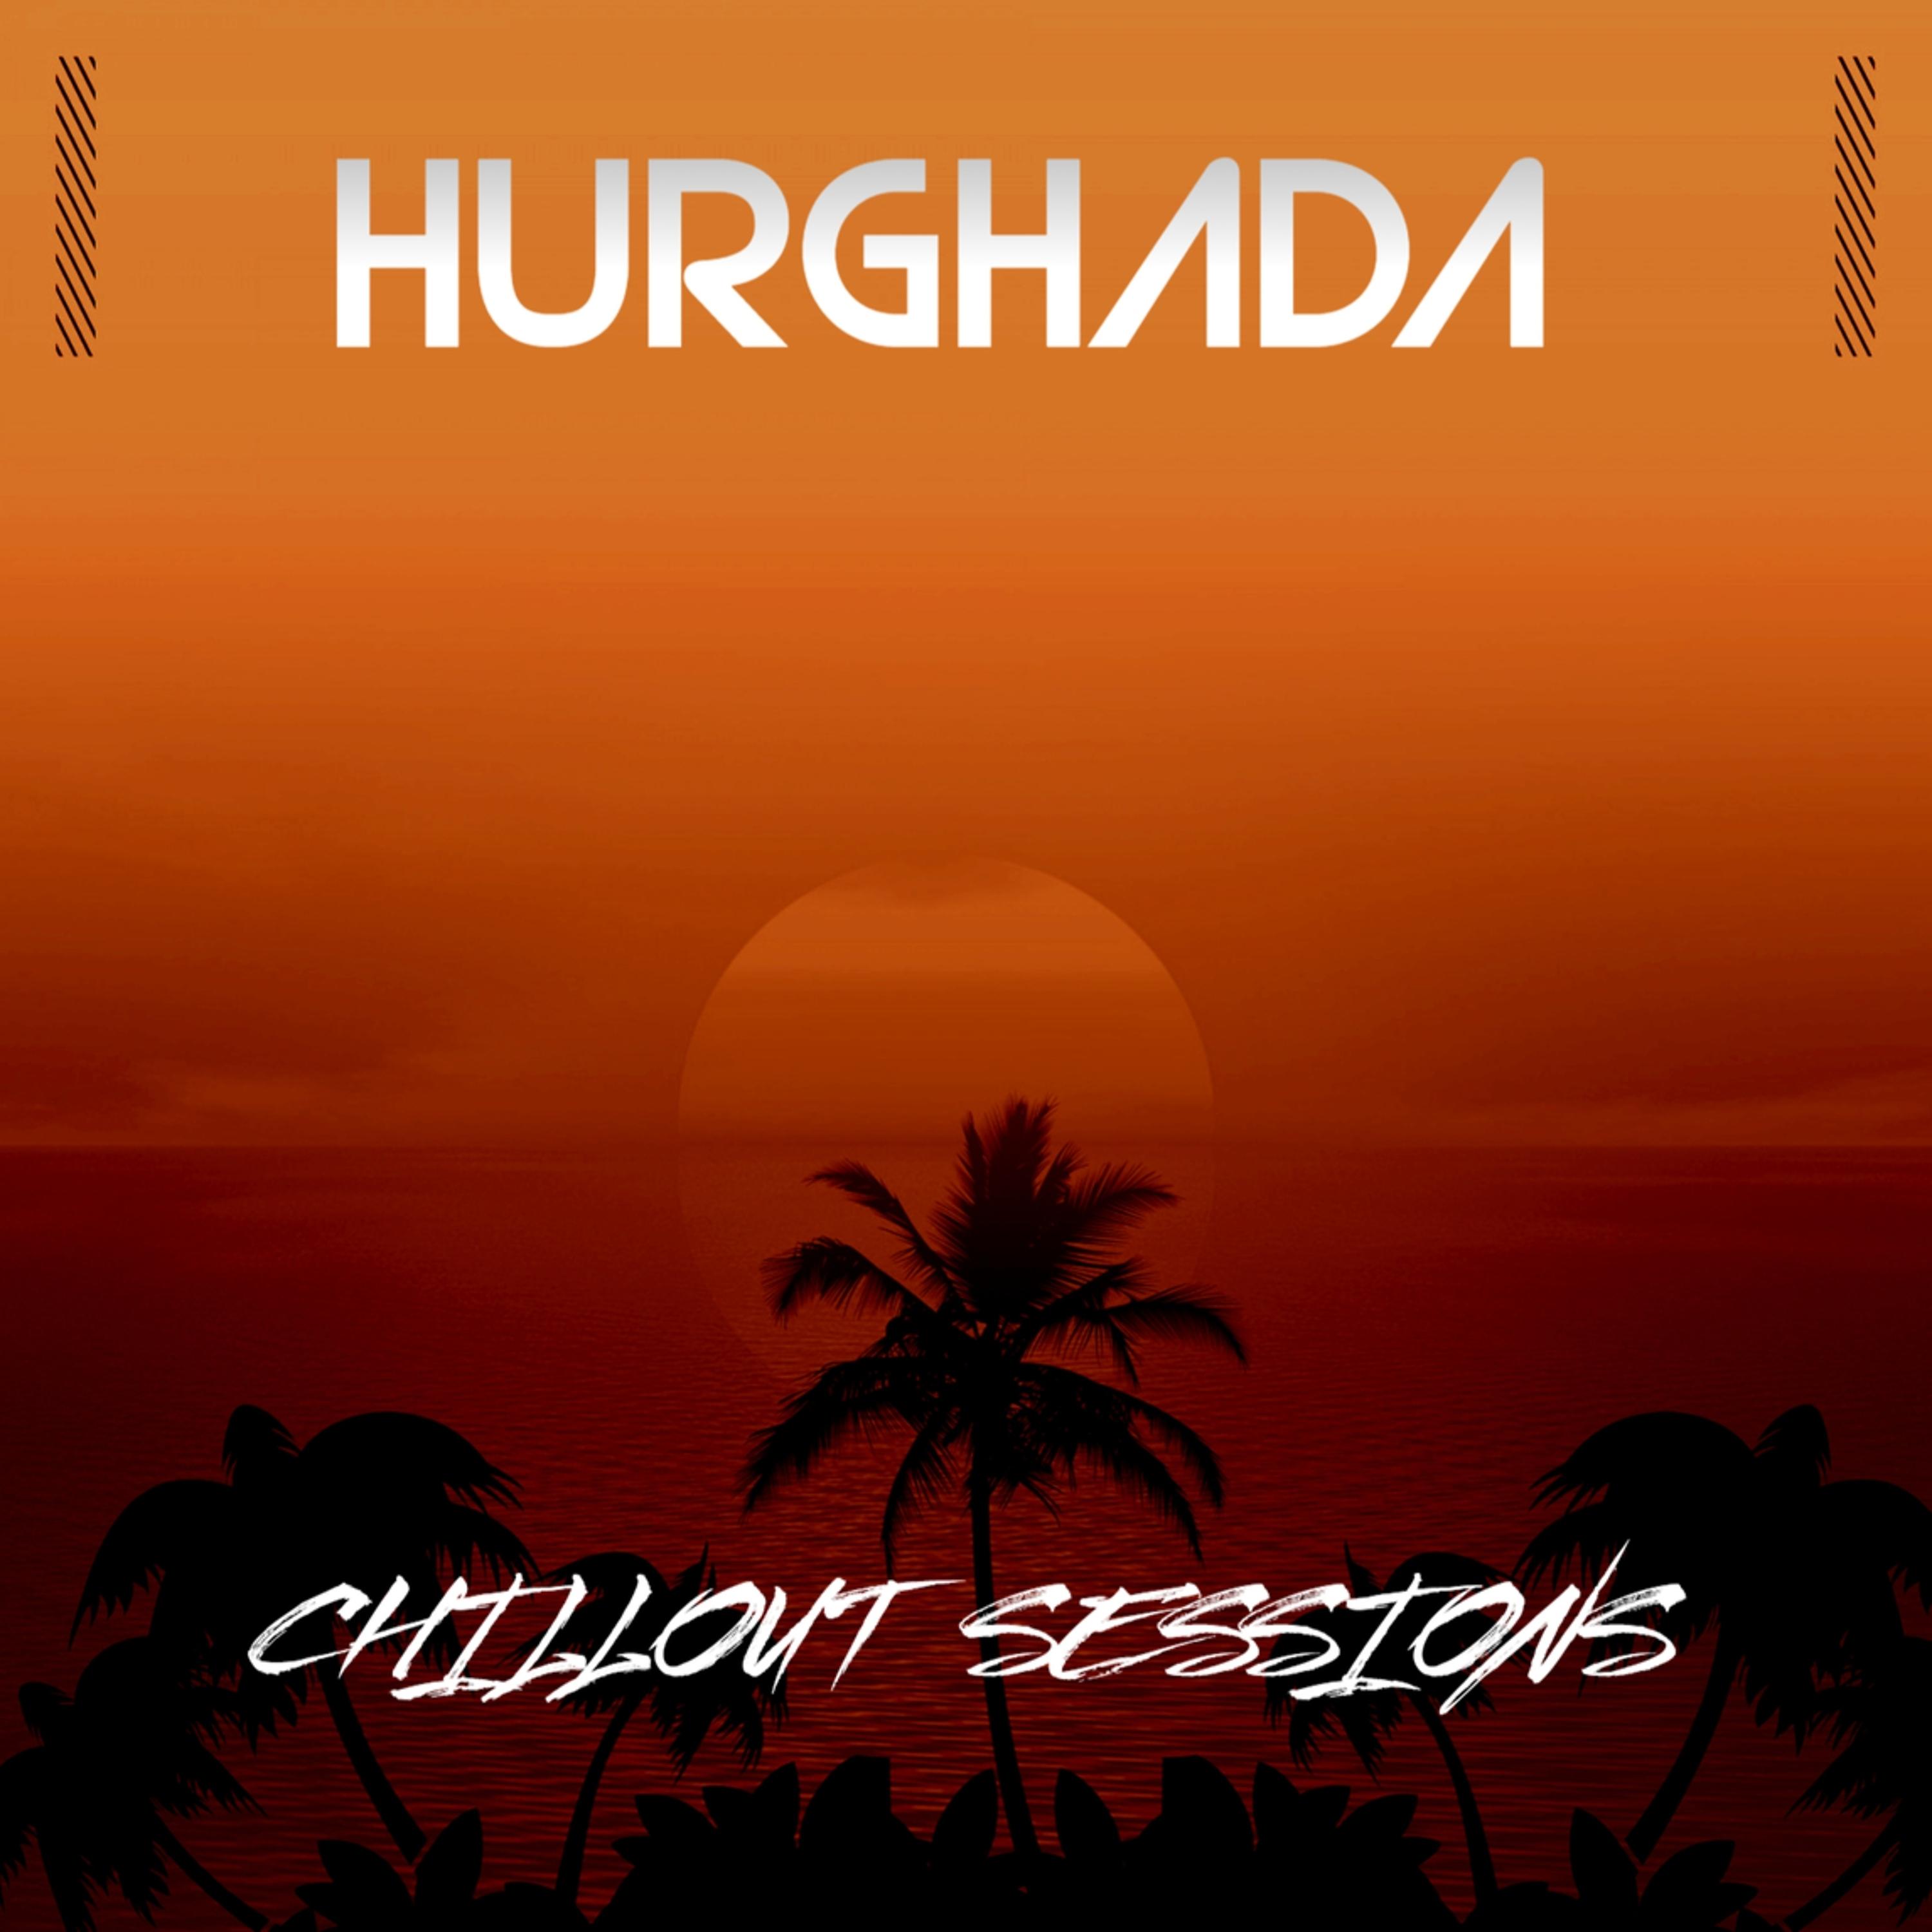 Постер альбома Hurghada Chillout Sessions